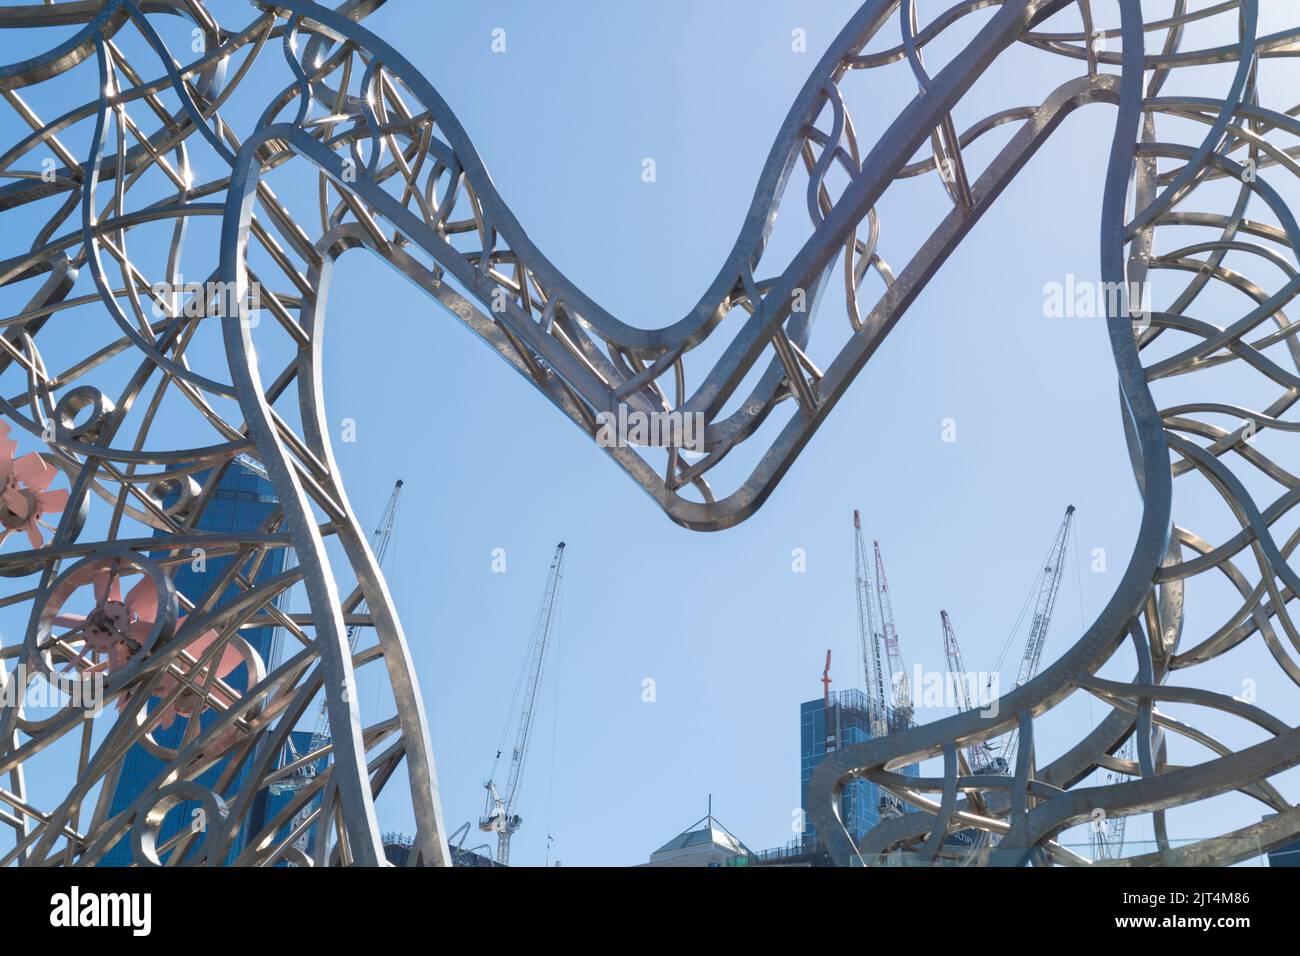 Construction cranes framed by public art in Melbourne's CBD. Stock Photo